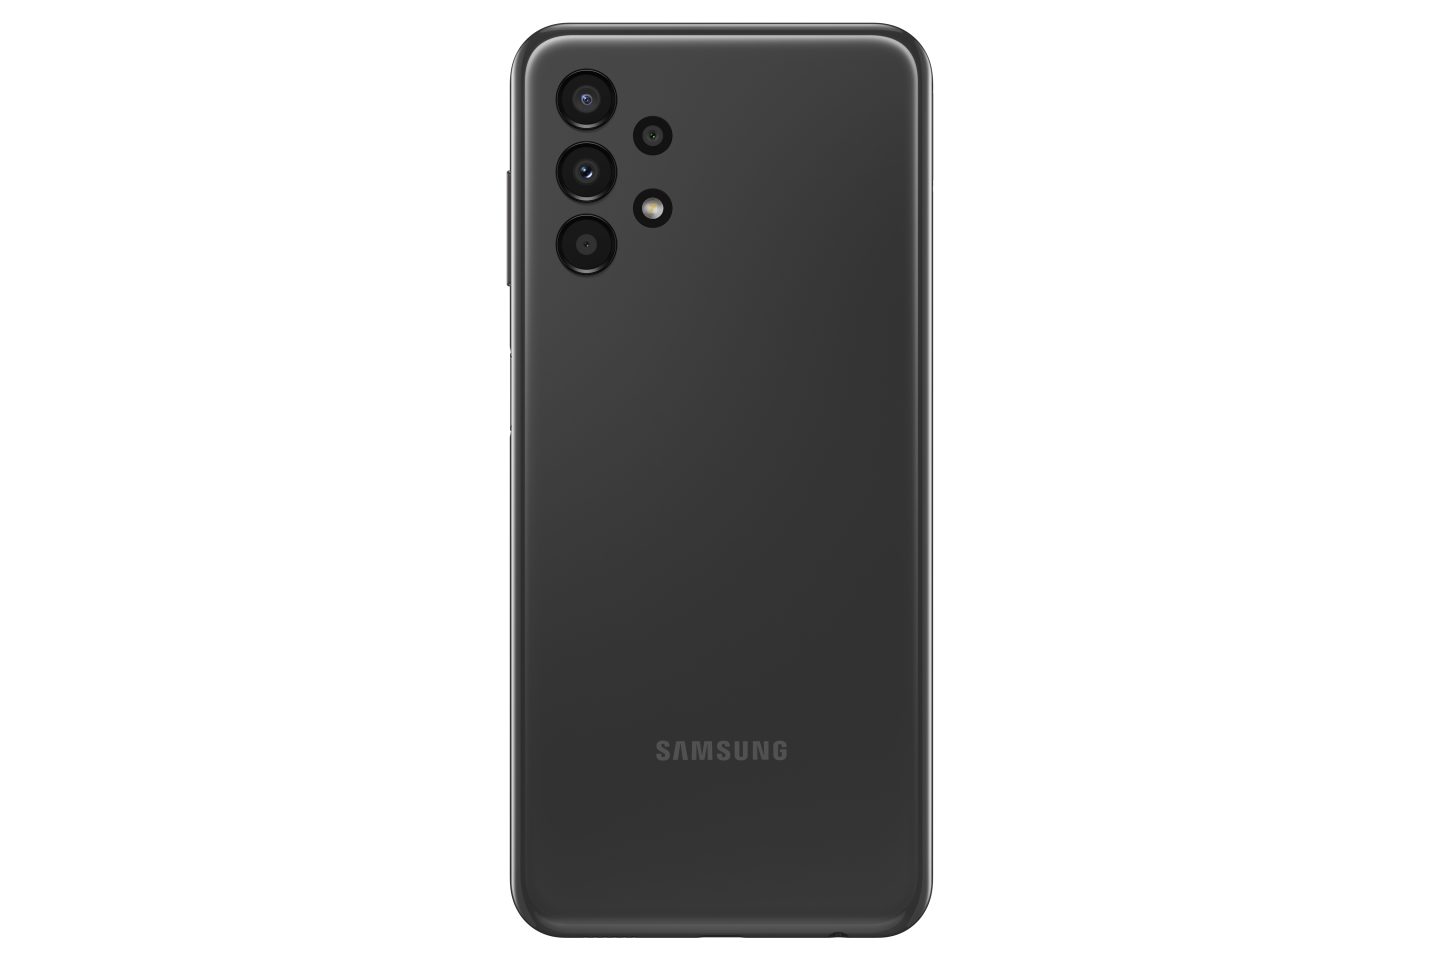 Samsung Galaxy A13 ( Black )  4G / LTE Smartphone with 6.6 Inch Display, Android 12, MicroSD Slot Up to 1TB, 5000 mAh Battery	